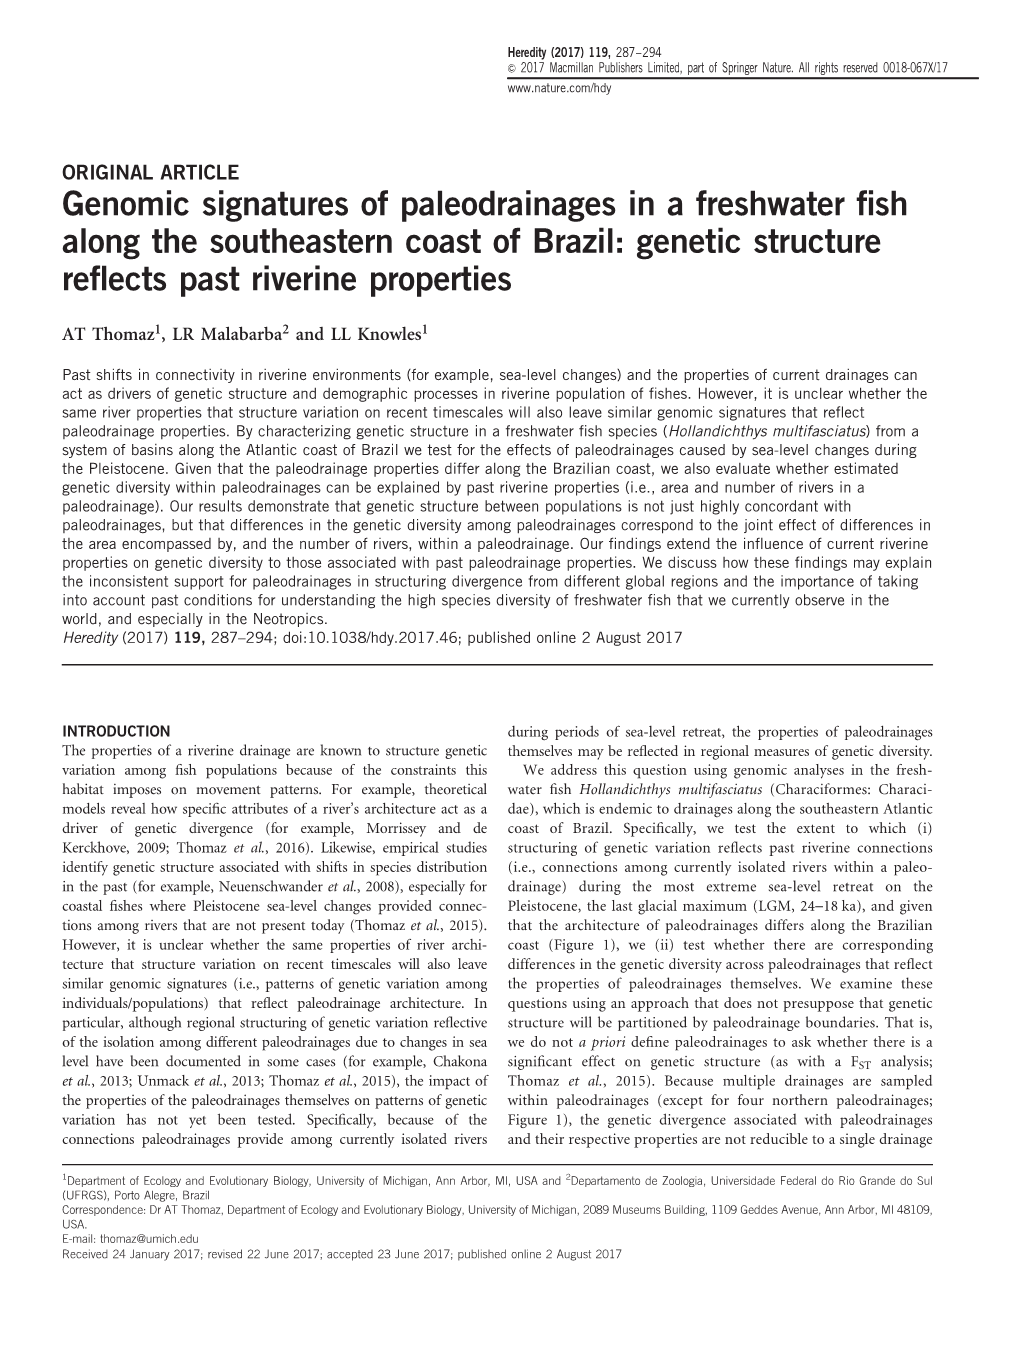 Genomic Signatures of Paleodrainages in a Freshwater Fish Along the Southeastern Coast of Brazil: Genetic Structure Reflects